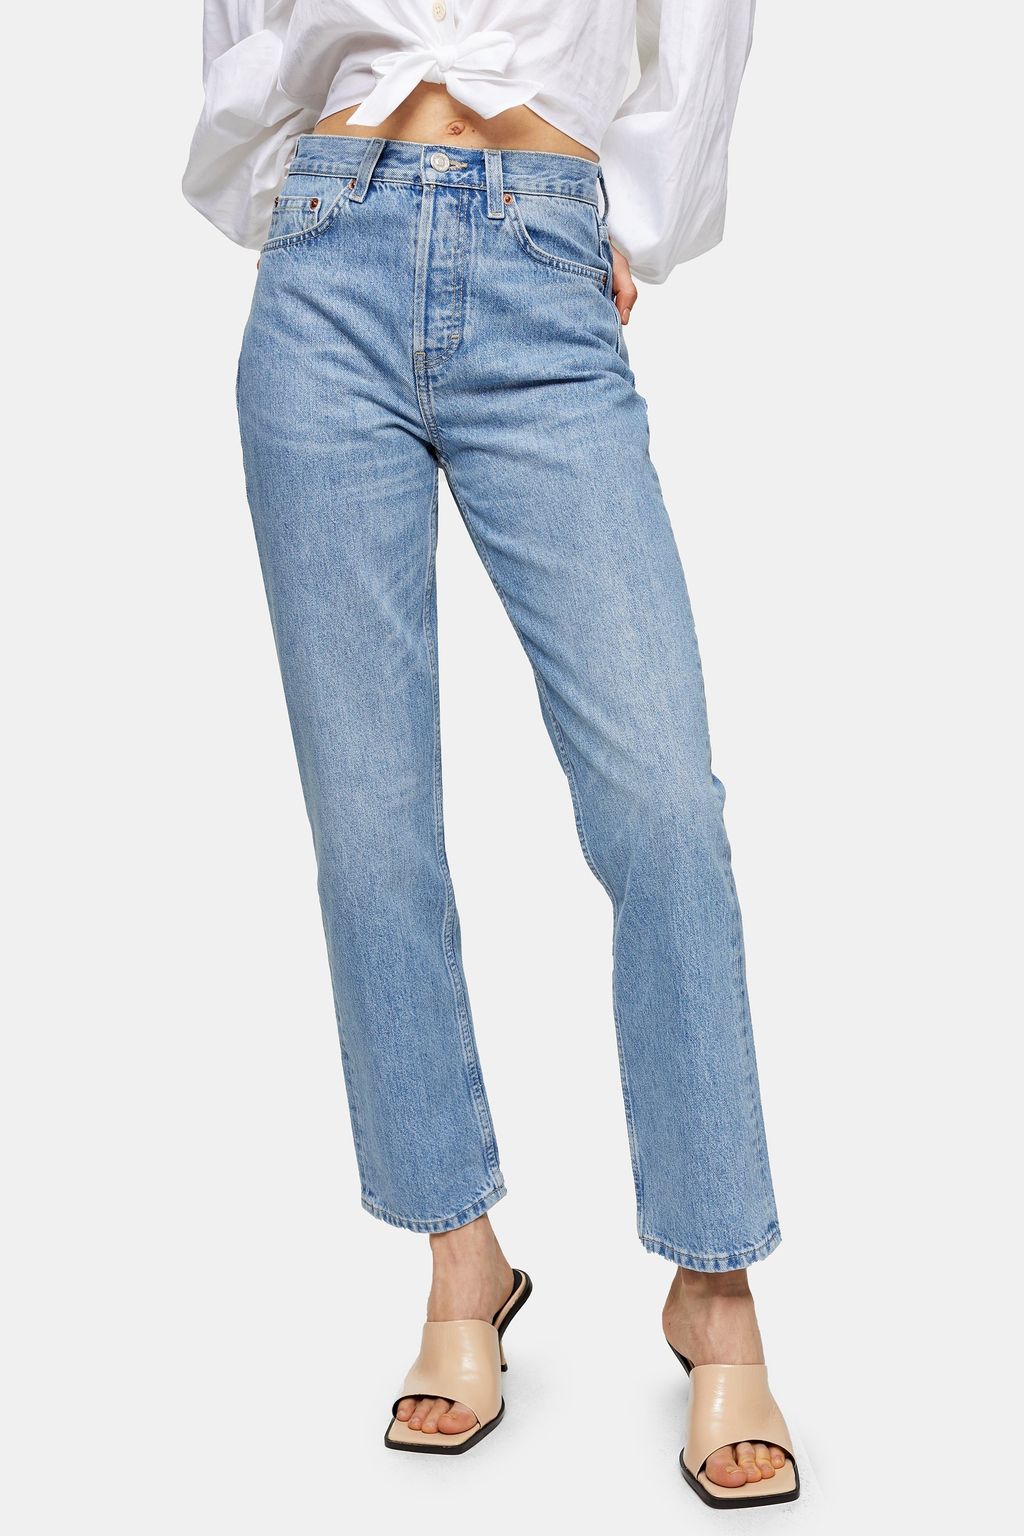 3 Denim Trends for Women Over 60 | Who What Wear